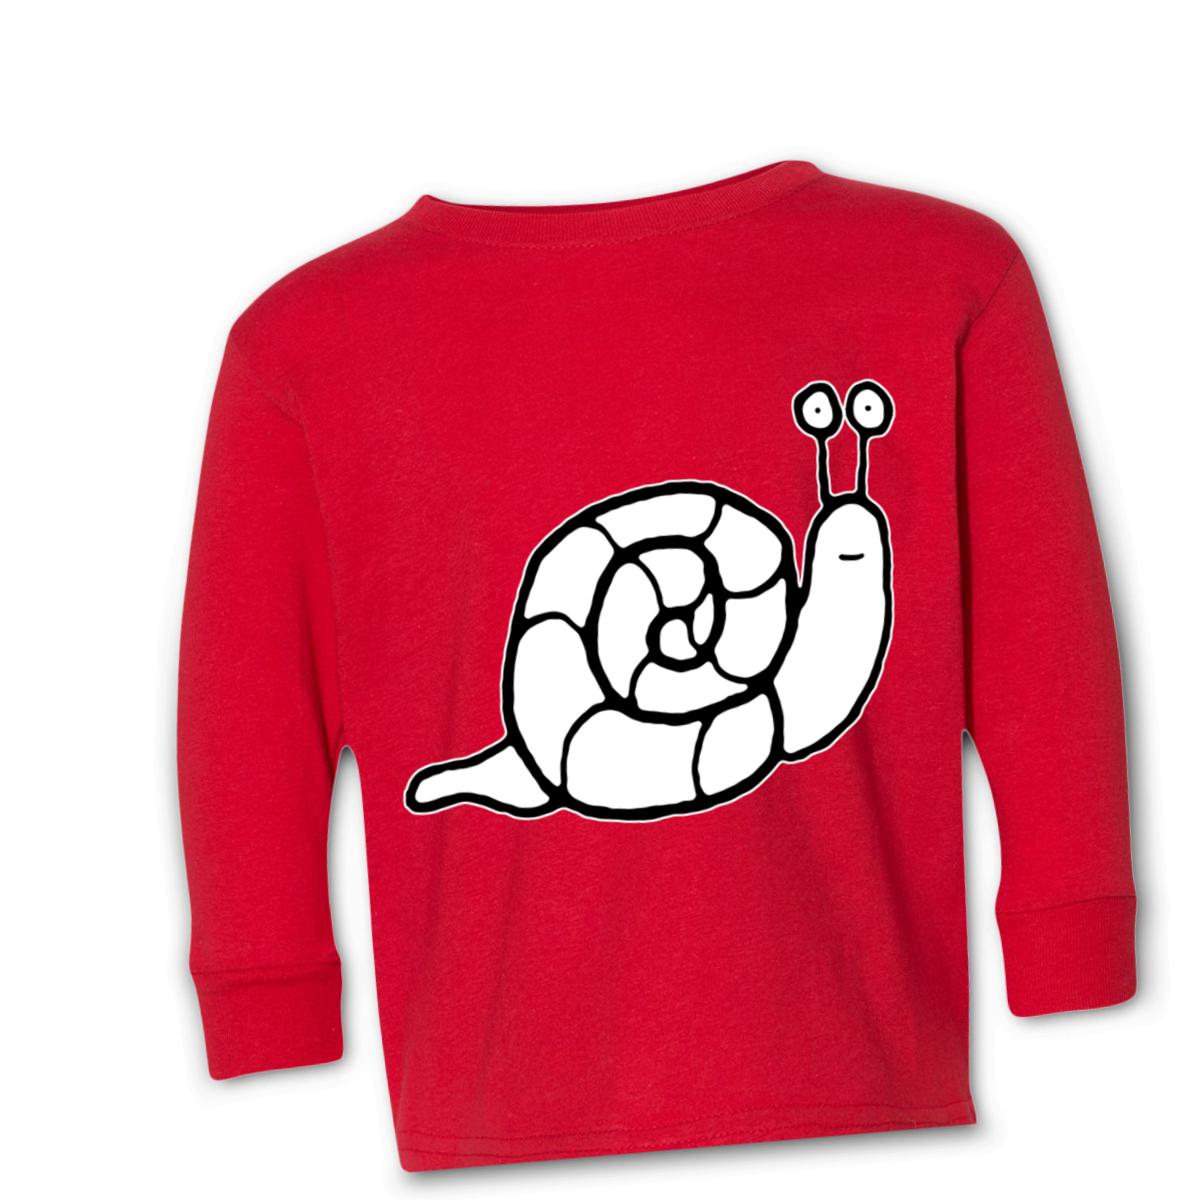 Snail Kid's Long Sleeve Tee Small red